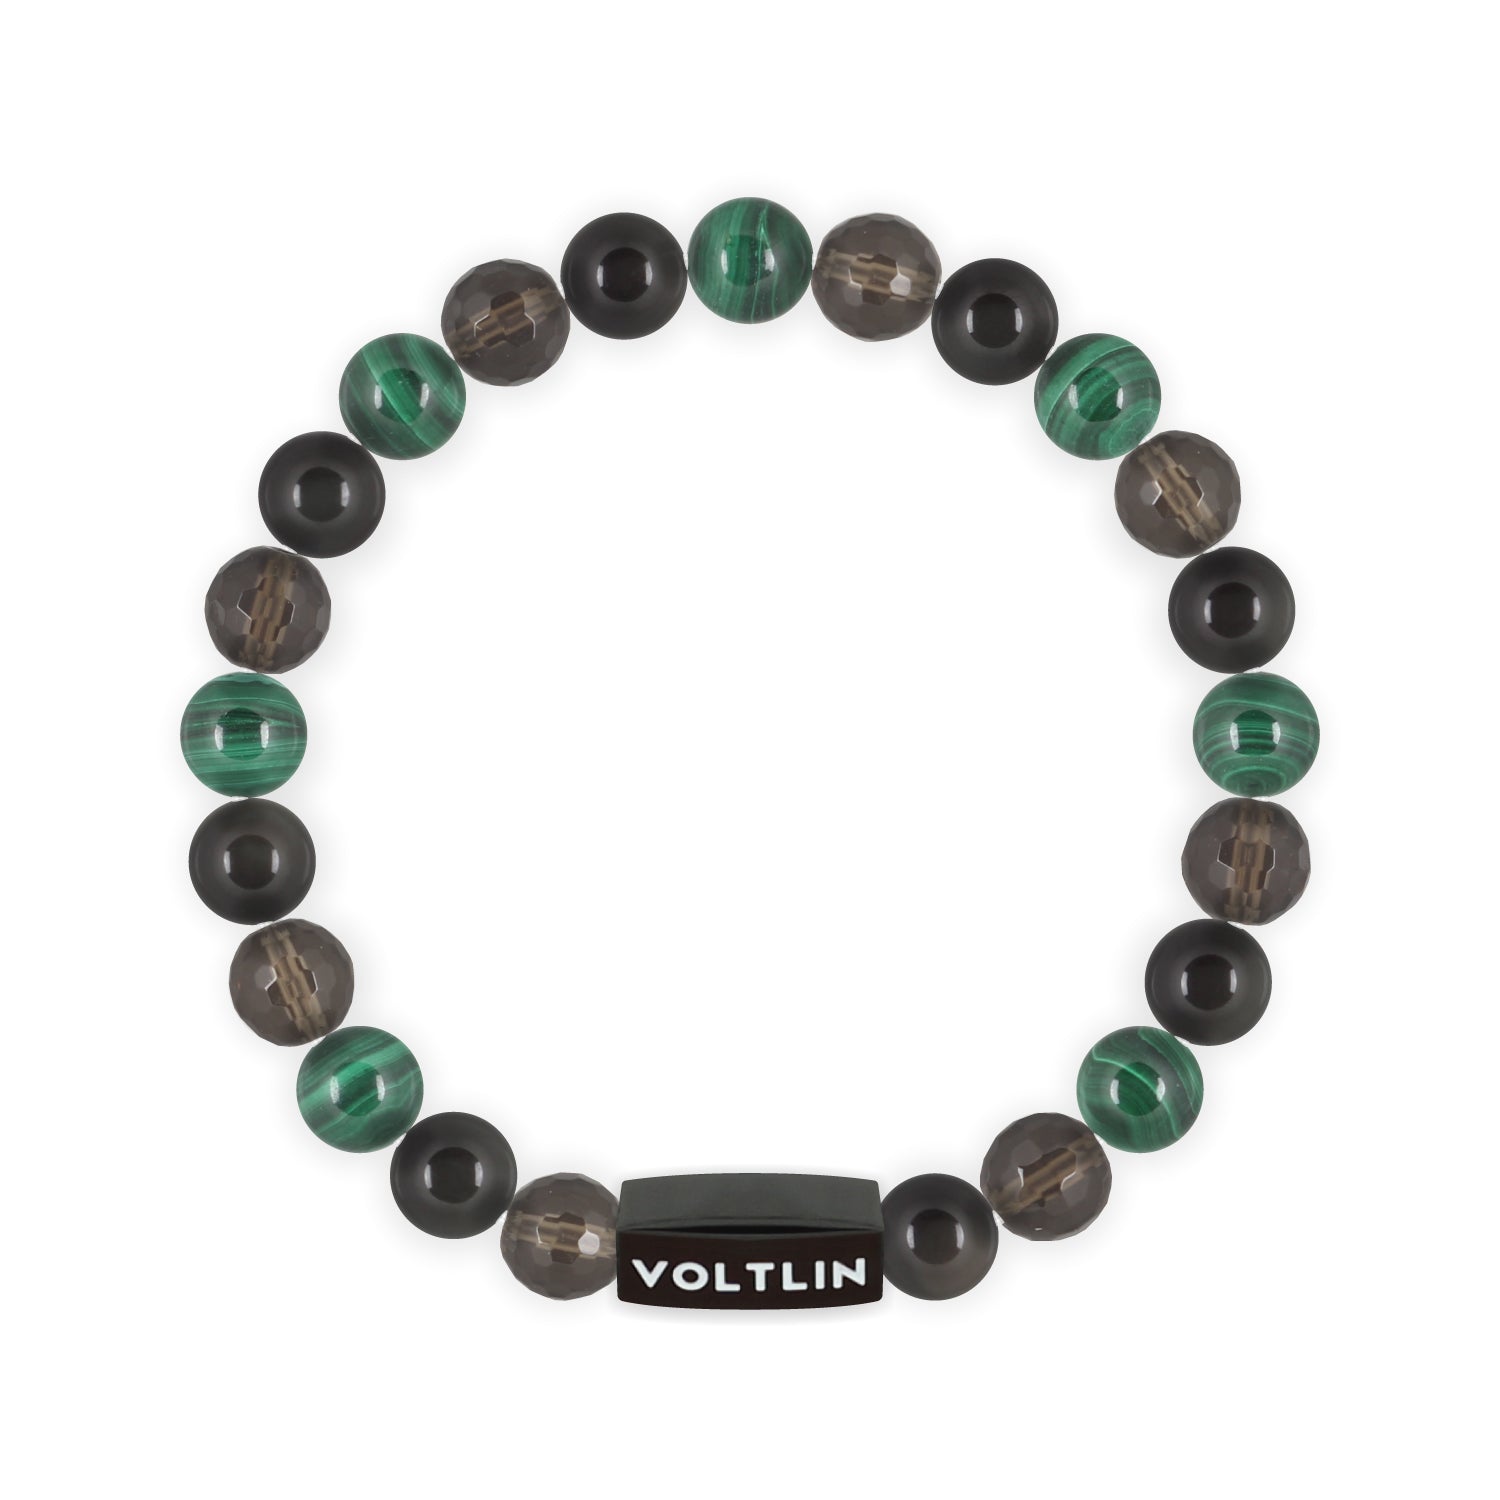 Front view of an 8mm Scorpio Zodiac crystal beaded stretch bracelet with black stainless steel logo bead made by Voltlin